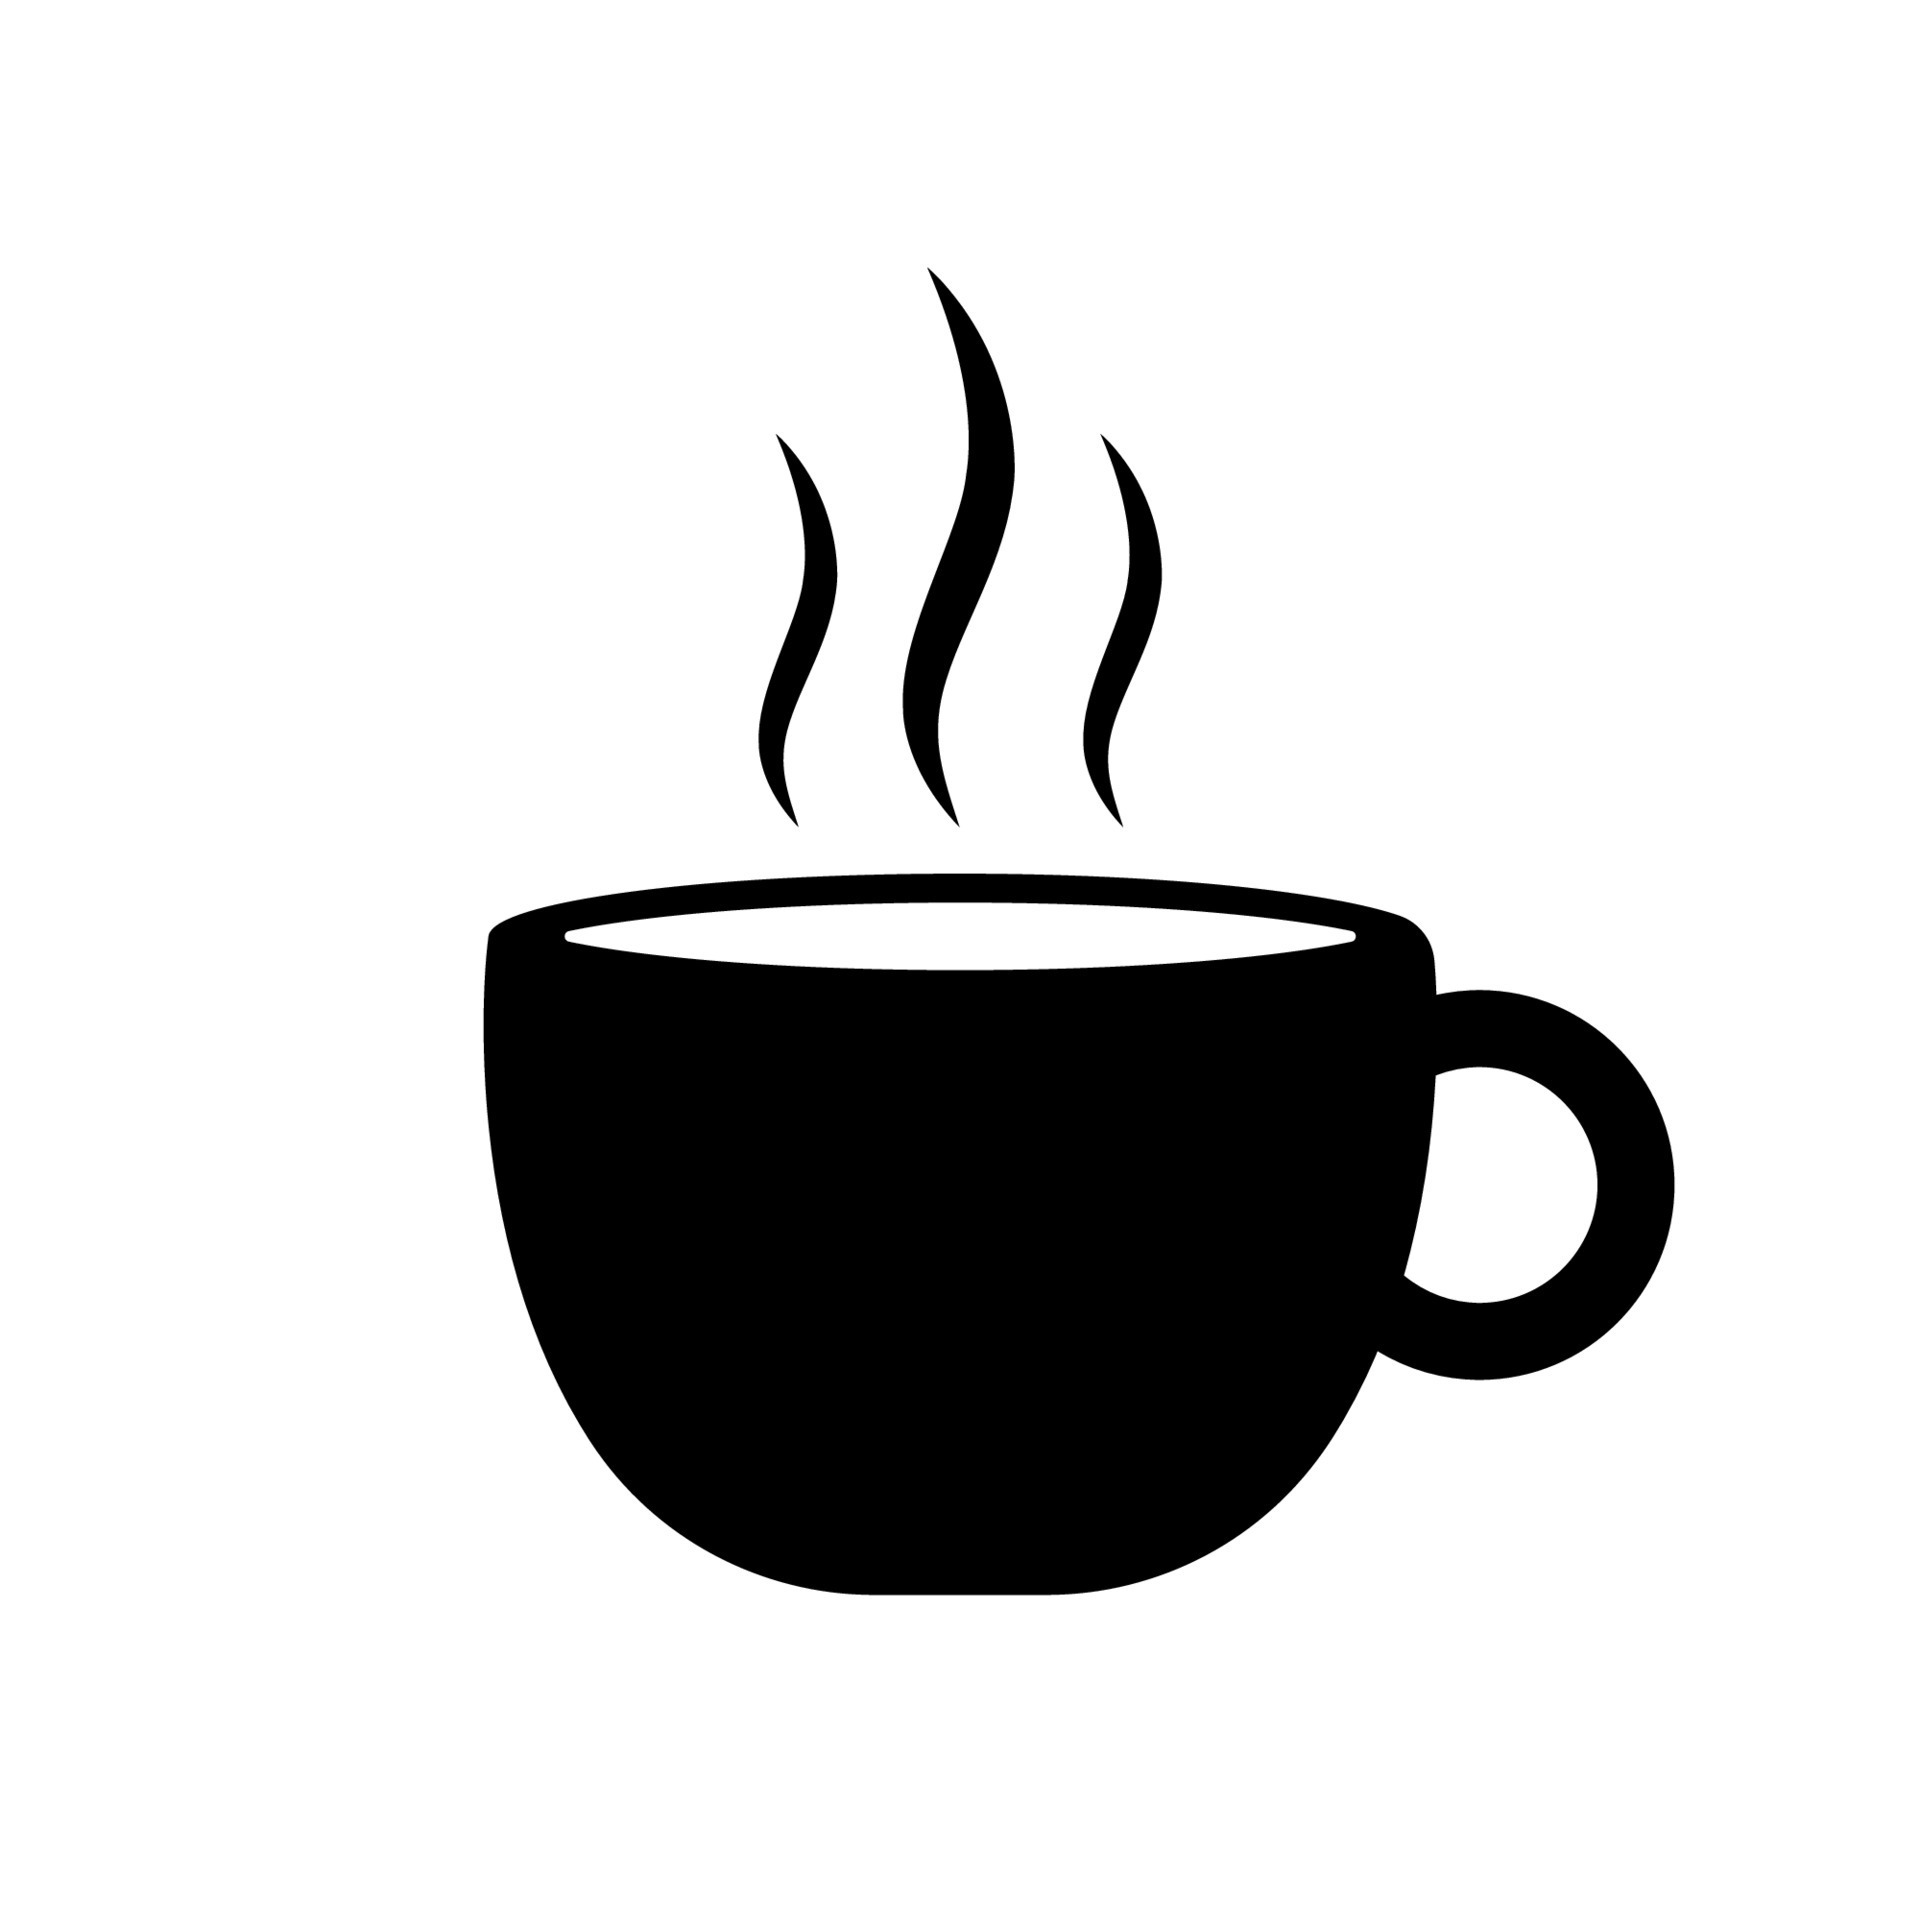 https://static.vecteezy.com/system/resources/previews/011/135/036/original/cup-of-hot-coffee-black-silhouette-icon-mug-of-steam-tea-on-saucer-glyph-pictogram-morning-breakfast-liquid-beverage-flat-symbol-fresh-drink-in-teacup-simple-logo-isolated-illustration-vector.jpg